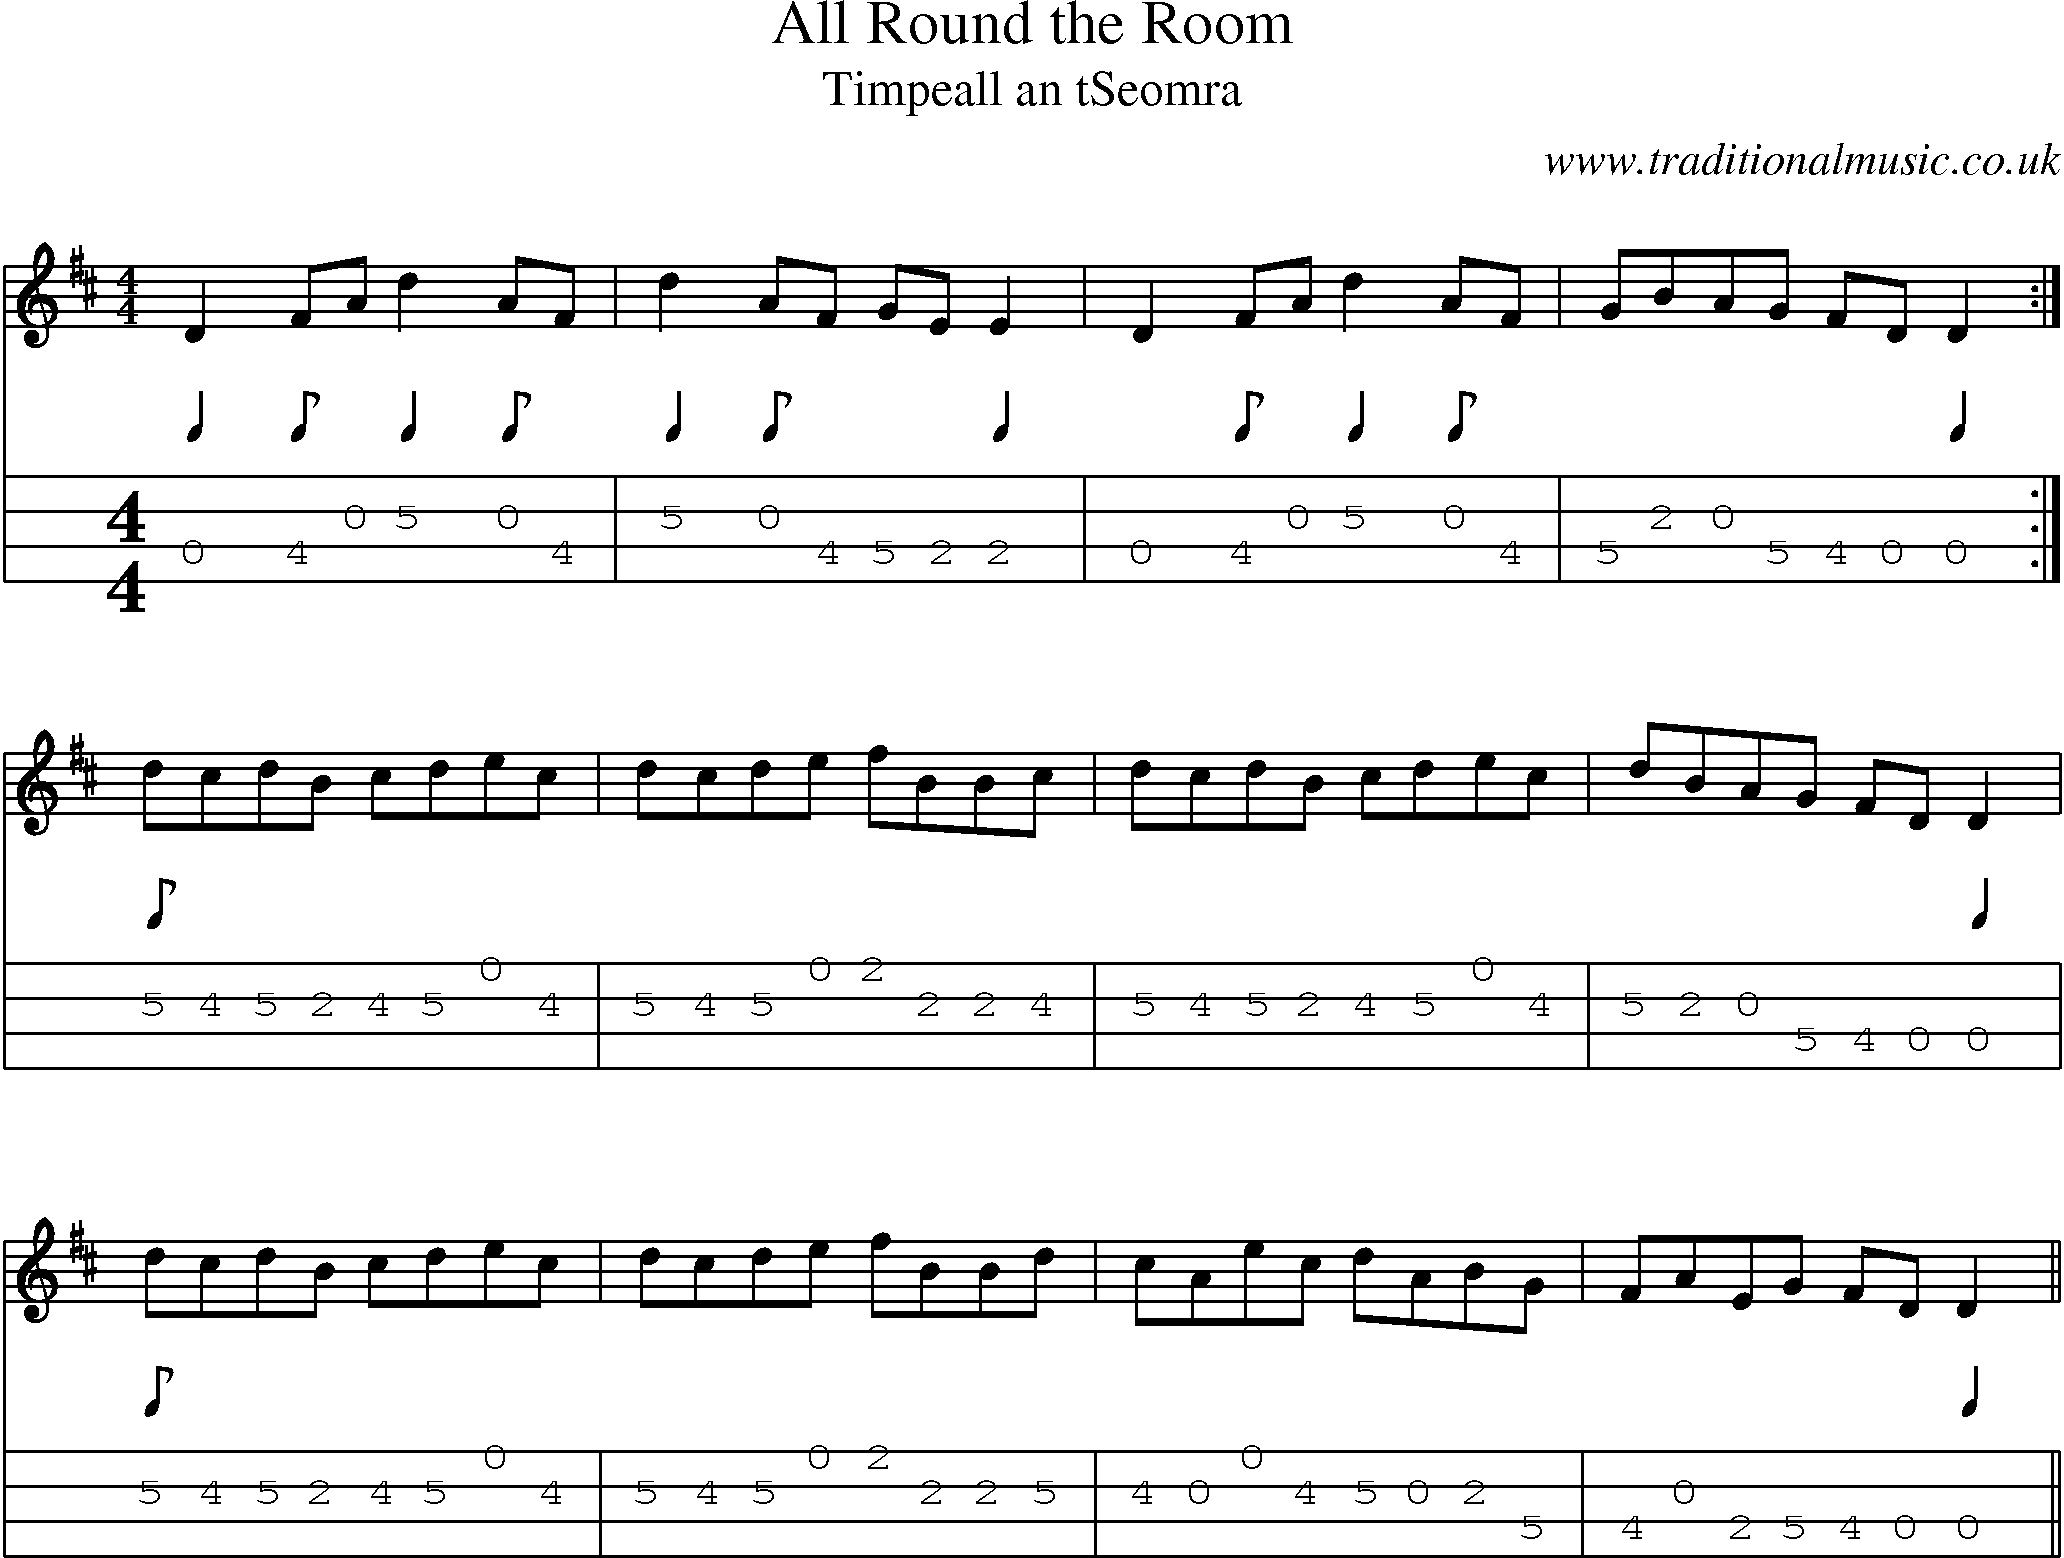 Music Score and Mandolin Tabs for All Round Room